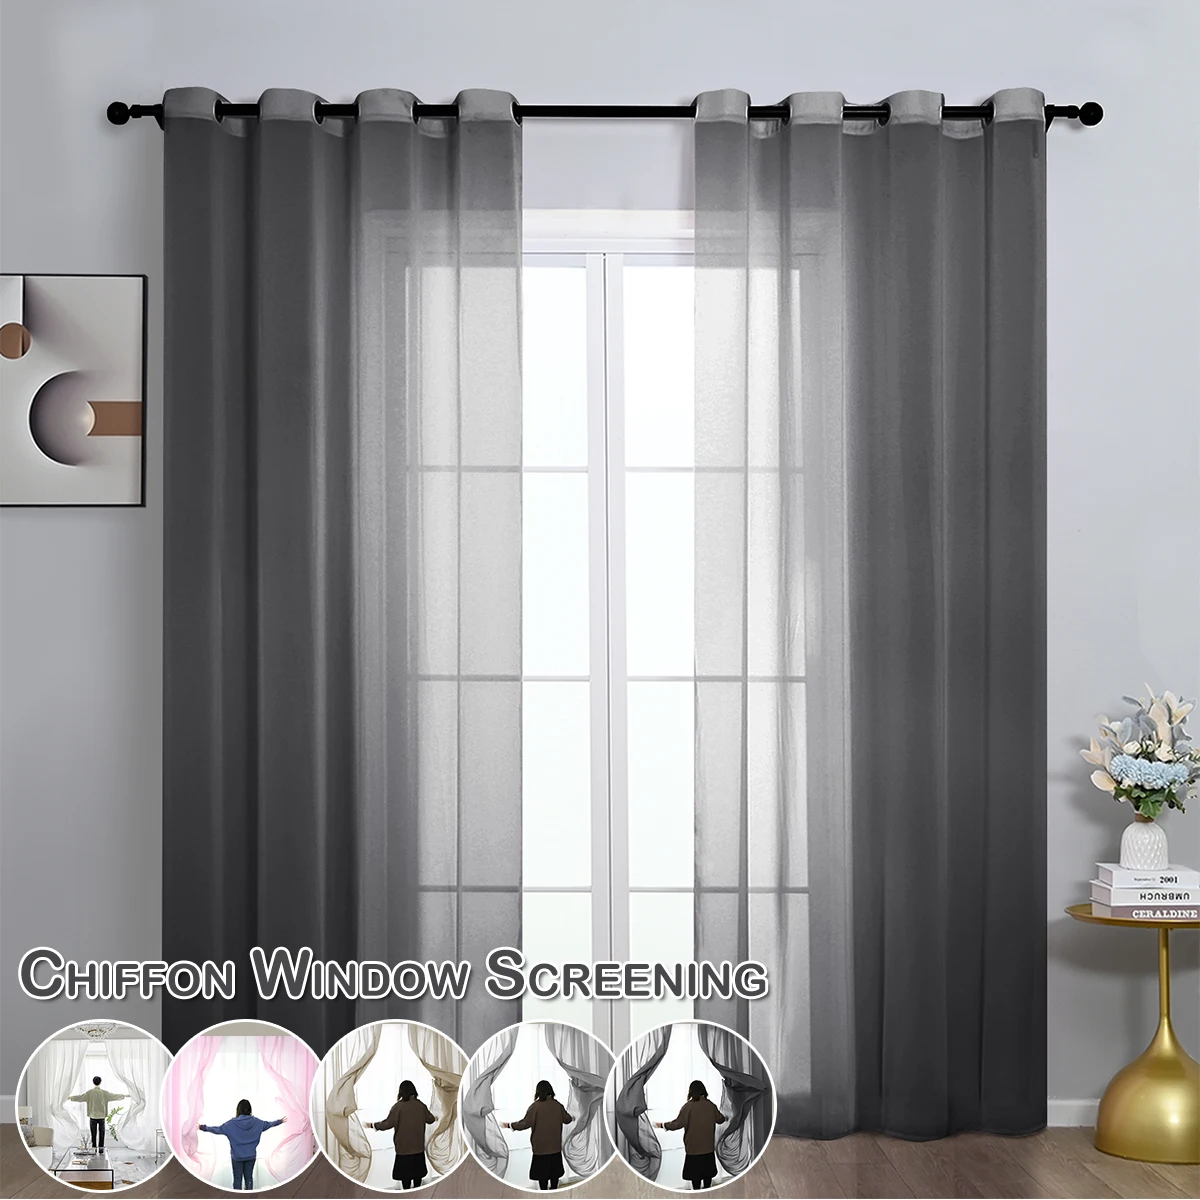 Details about   Window Screening Tulle Drap Sheer Curtains for Room Furniture Cover Rod 3 Sizes 